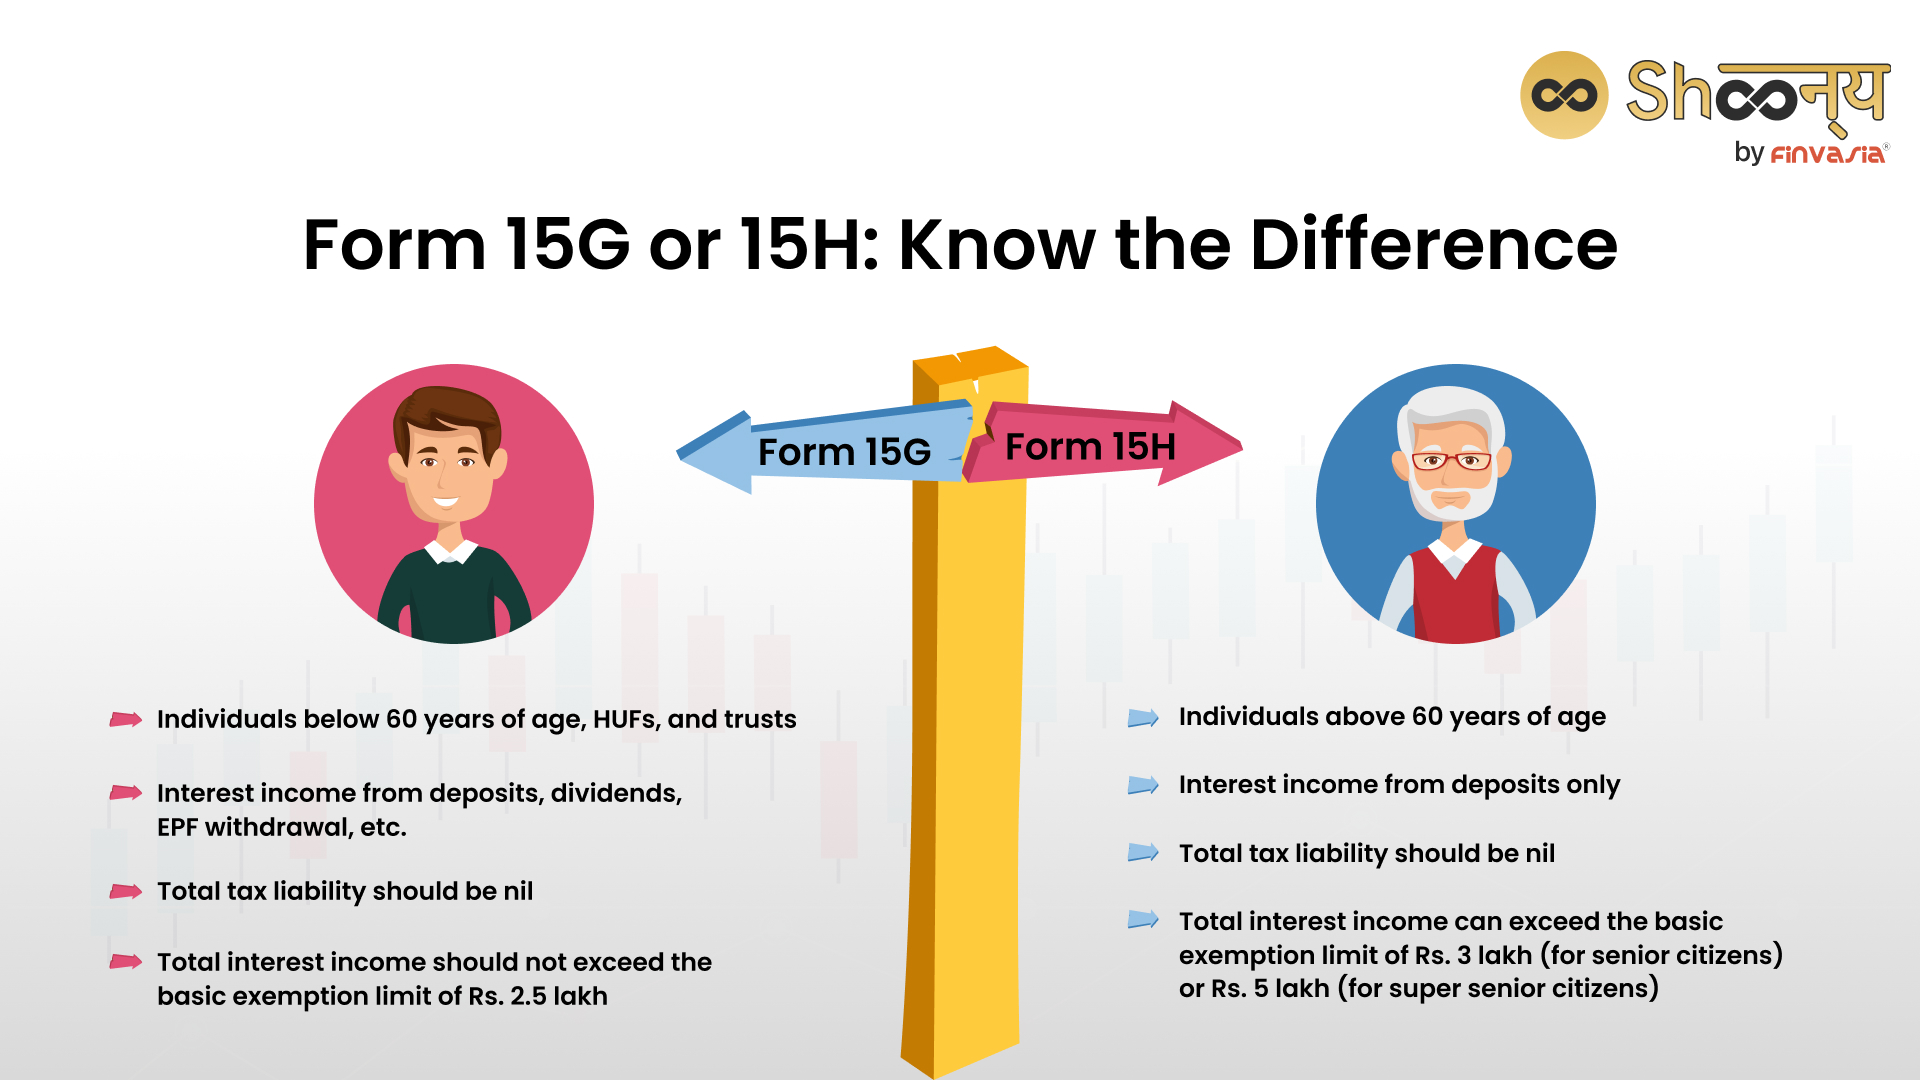 Form 15G or 15H: Know the Difference
